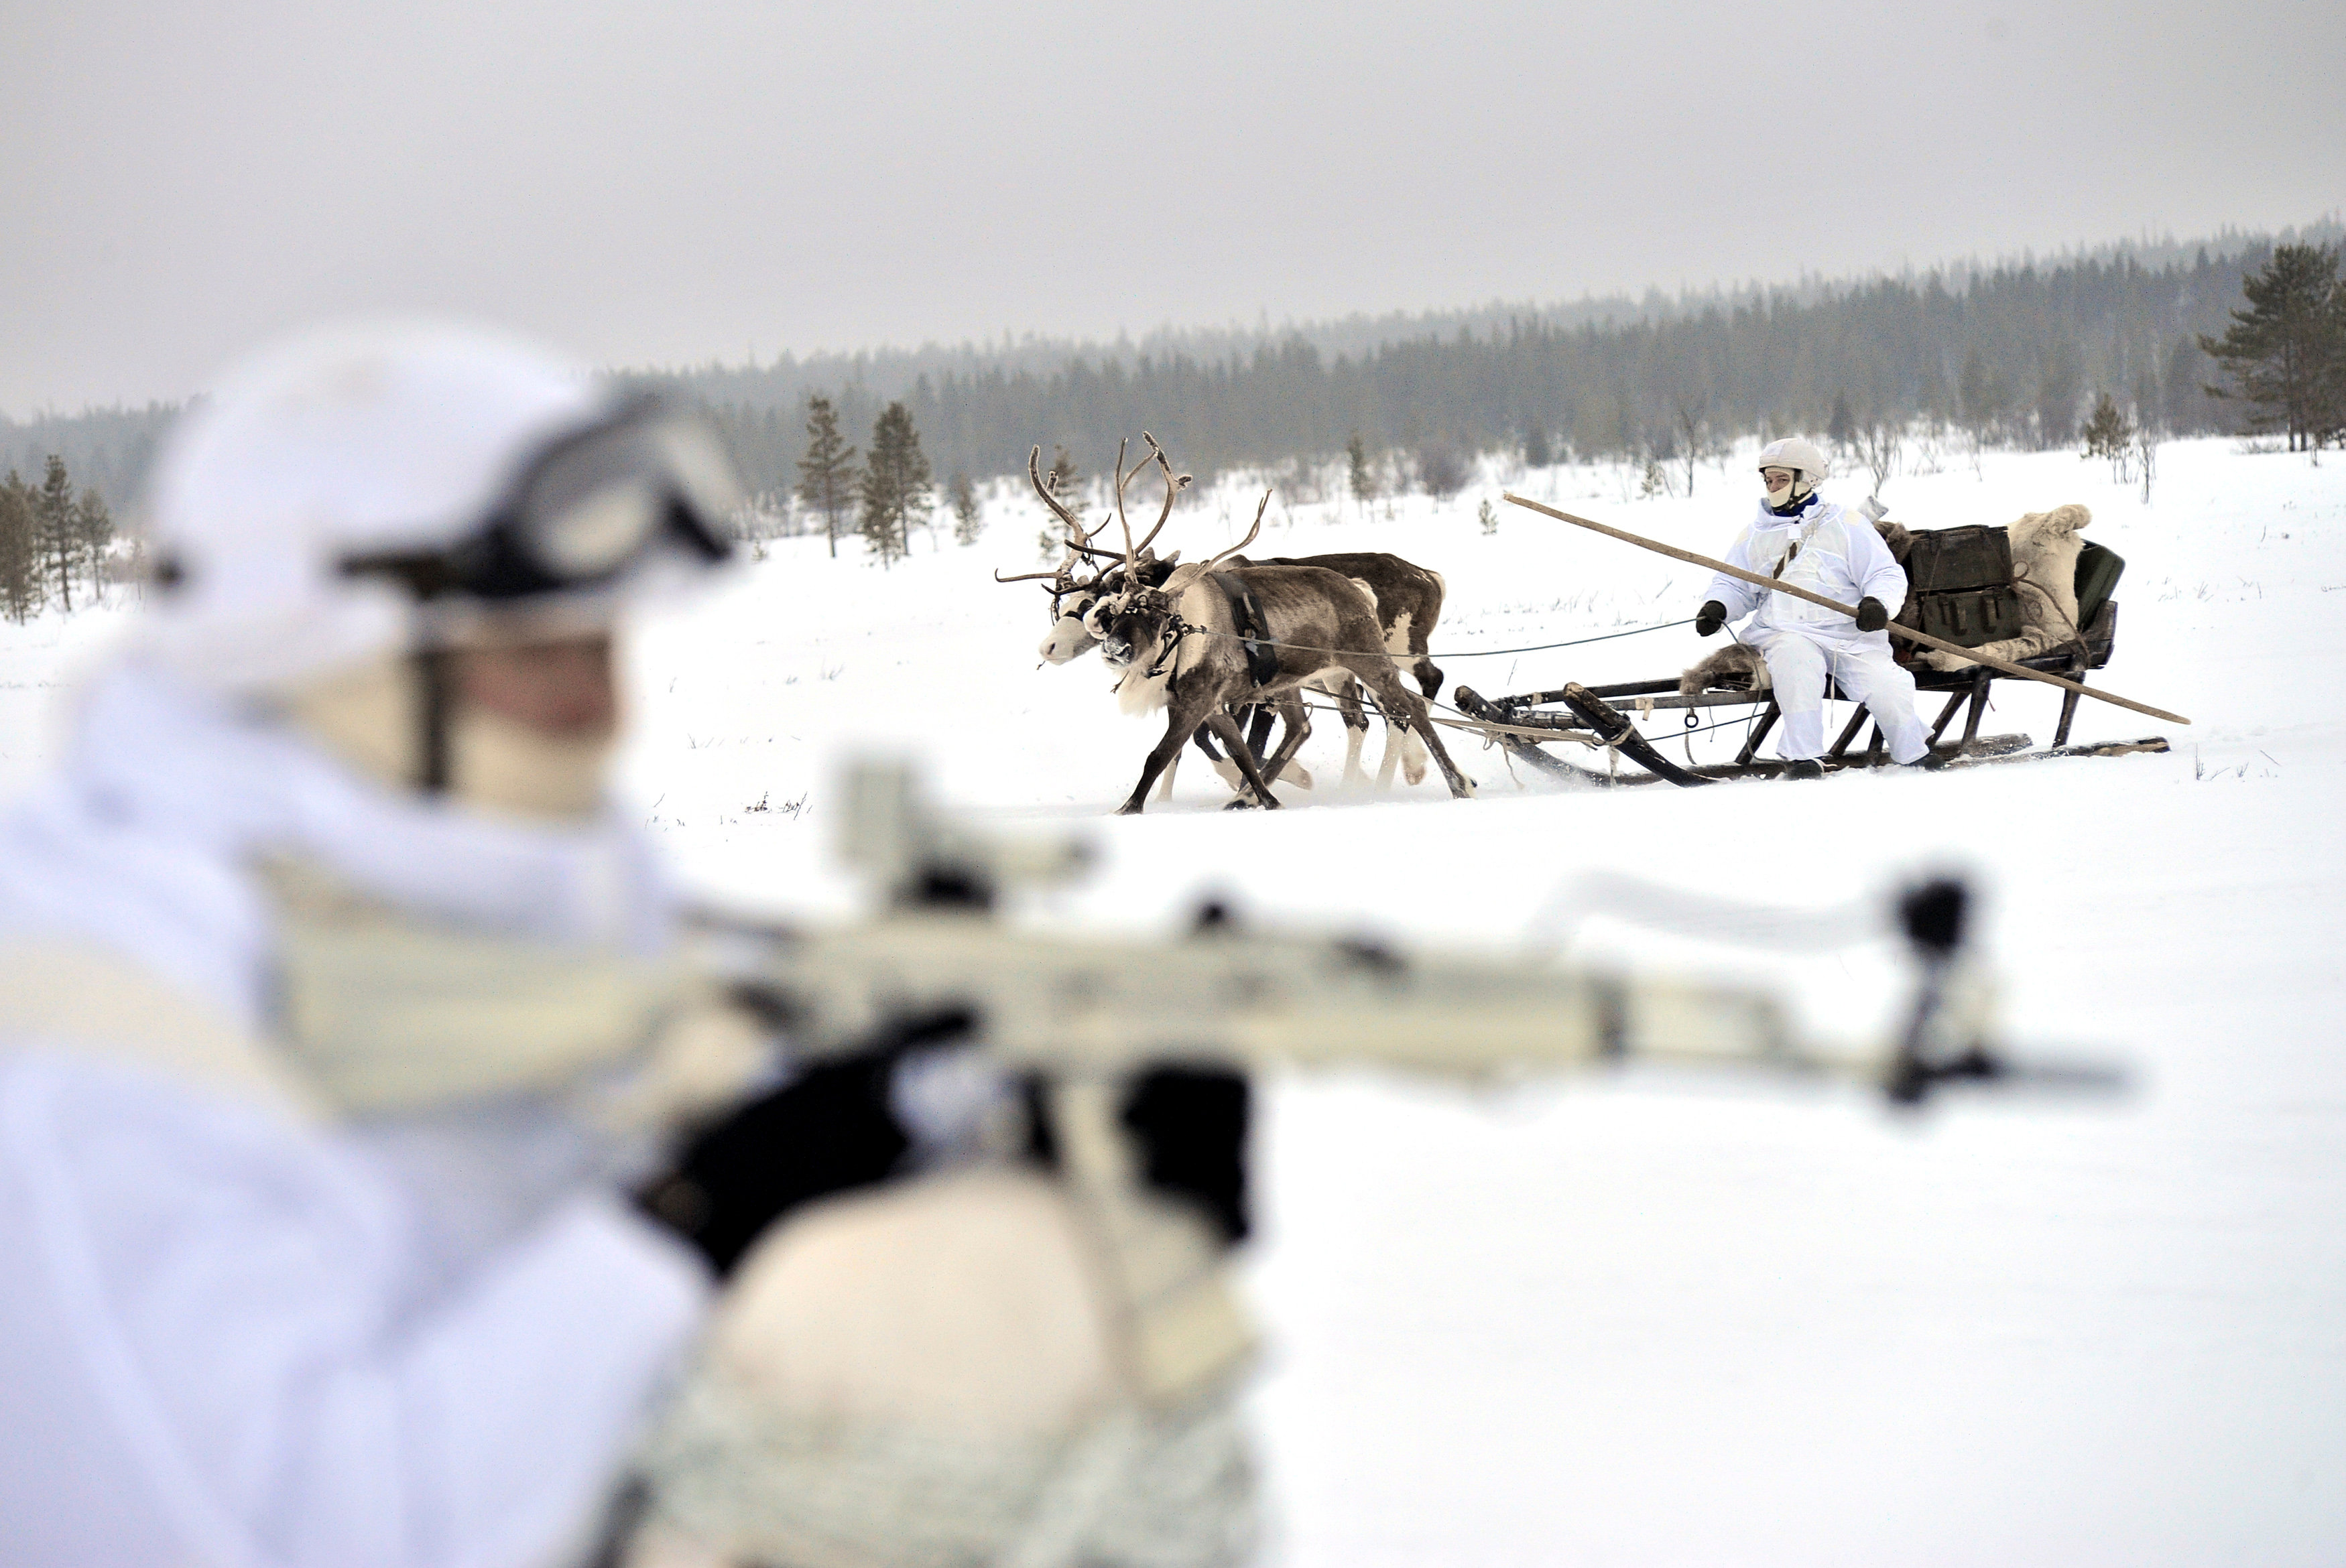 Russian servicemen of the Northern Fleet's Arctic mechanised infantry brigade participate in a military drill on riding reindeer and dog sleds near the settlement of Lovozero outside Murmansk, Russia January 23, 2017. Picture taken January 23, 2017. (Lev Fedoseyev / Ministry of Defence of the Russian Federation / Handout via Reuters)